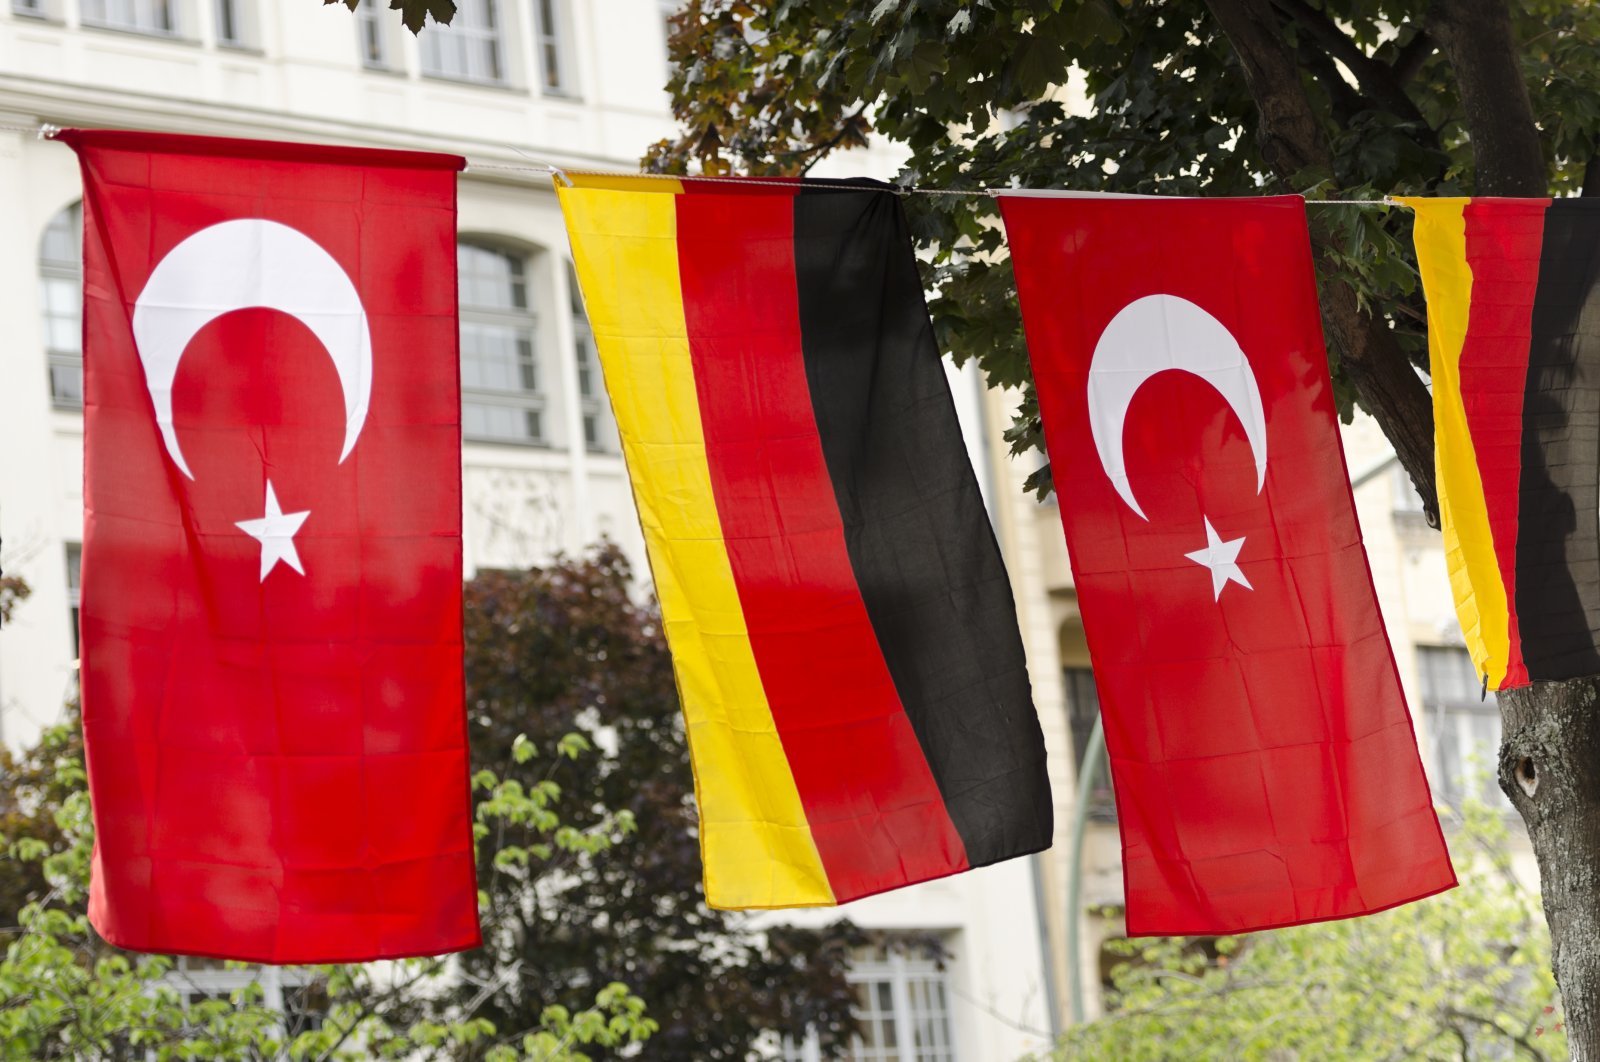 The flags of Germany and Türkiye hanging outside on a street in Kreuzberg, Berlin, Germany. (Getty Images)